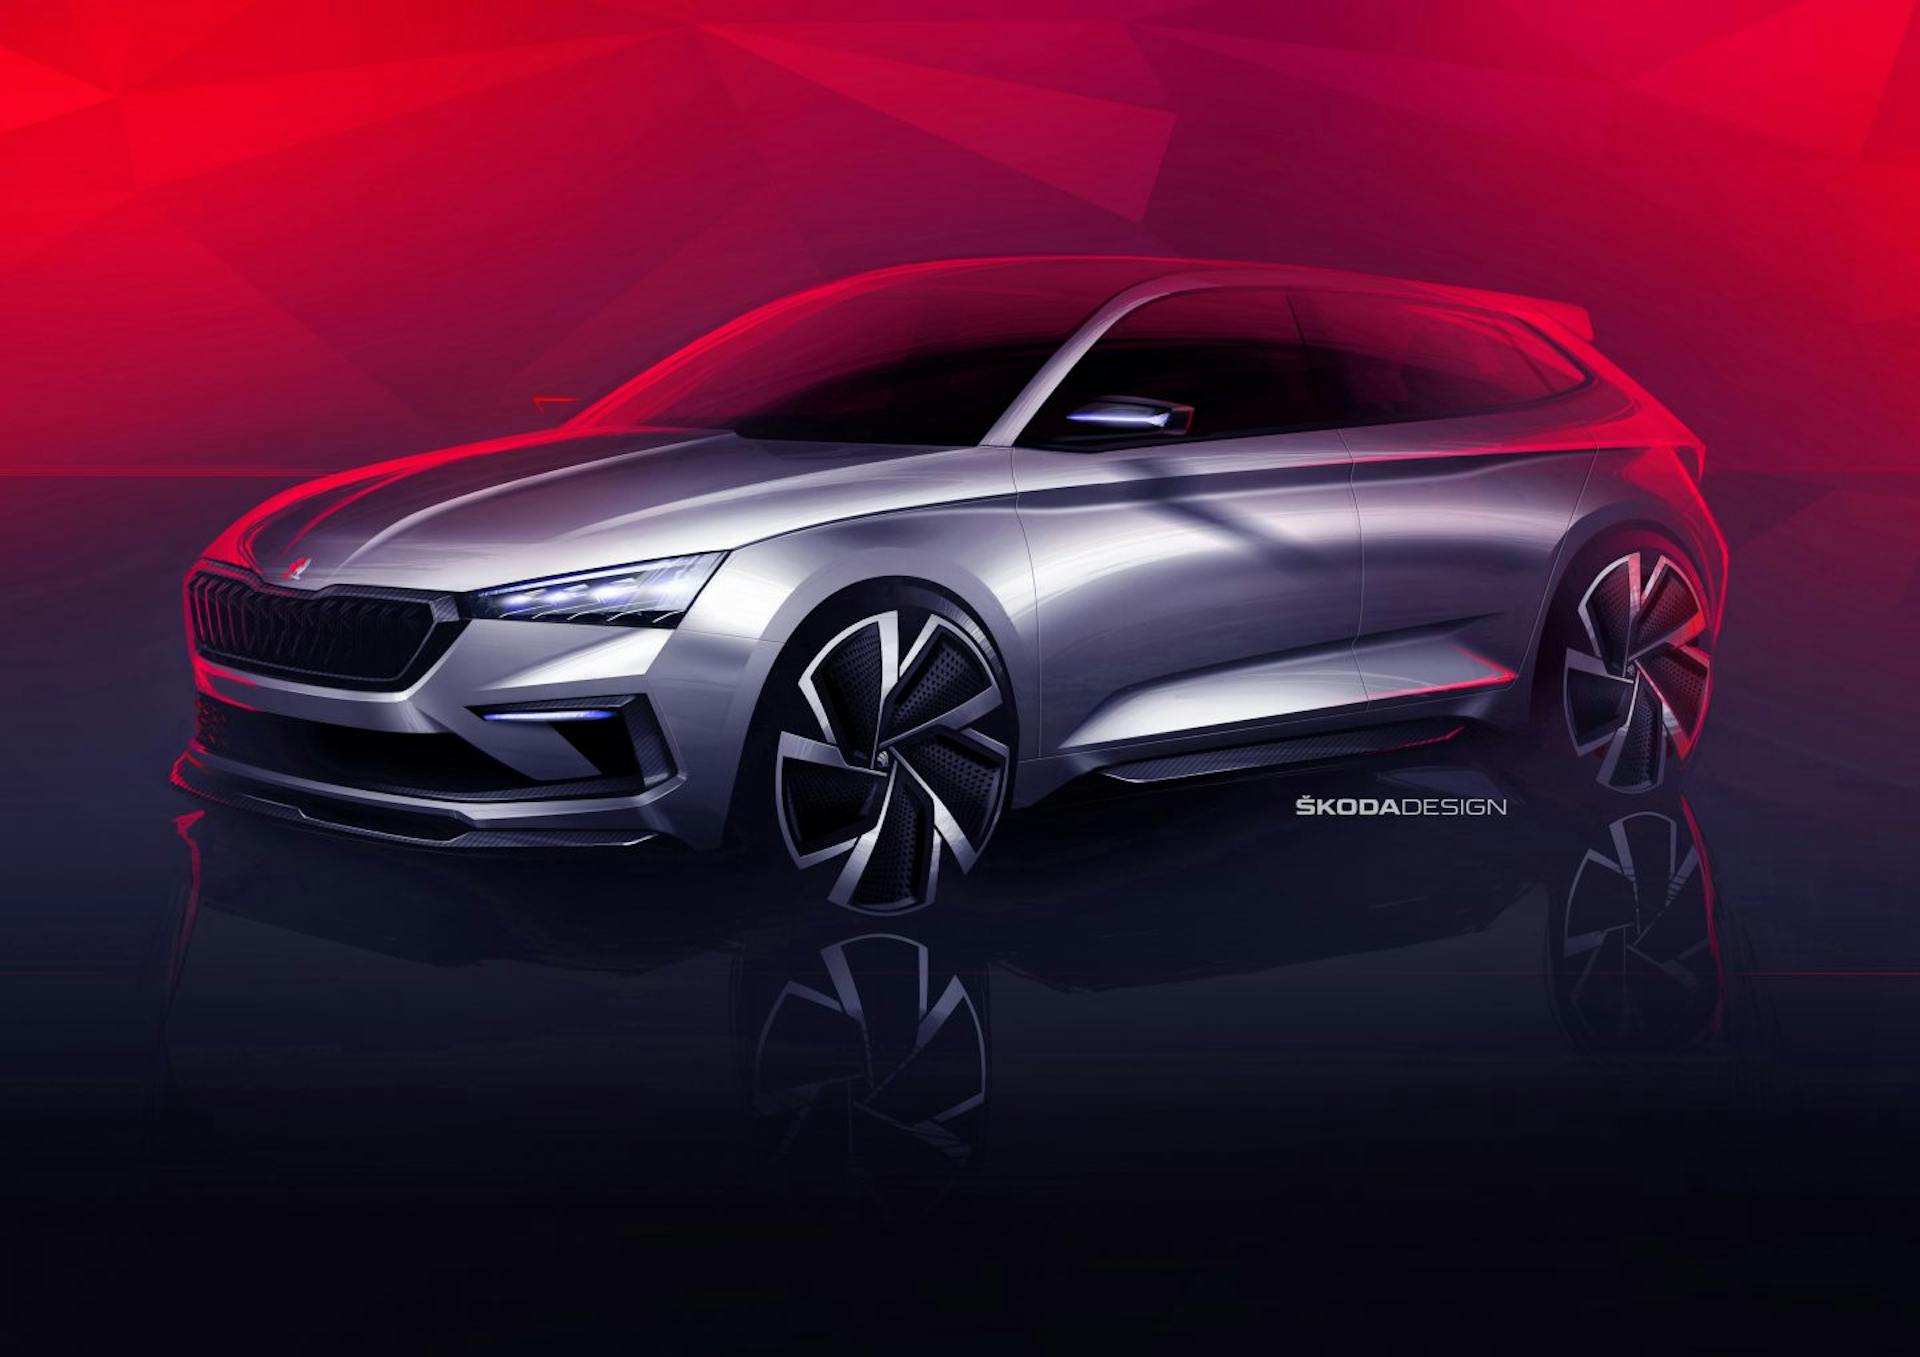 180830_%C5%A0KODA-VISION-RS-reveals-design-for-next-RS-generation-and-a-future-compact-car-front-1440x1018.jpg